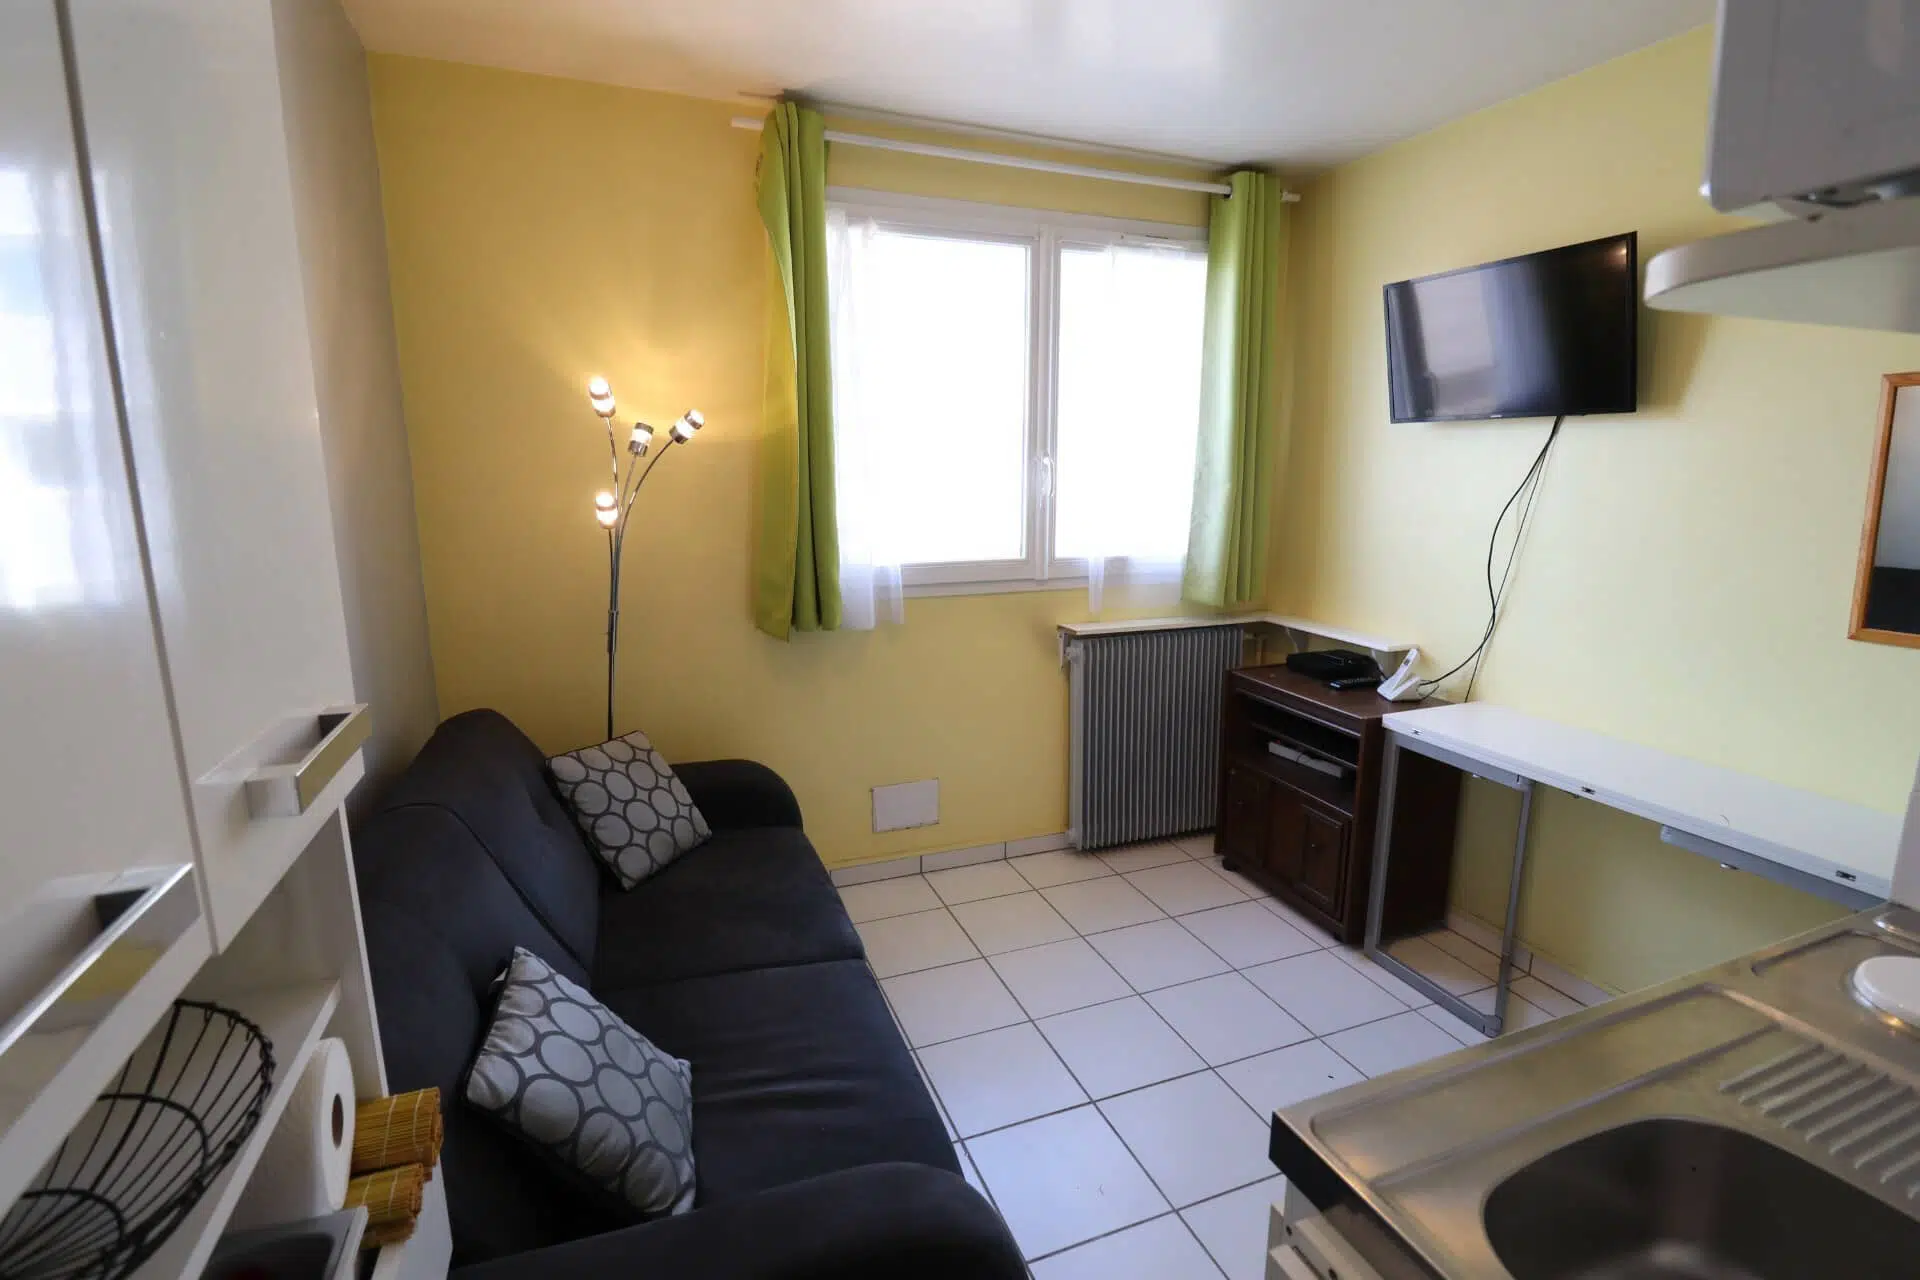 Location Appartement type F1 Le Havre m07